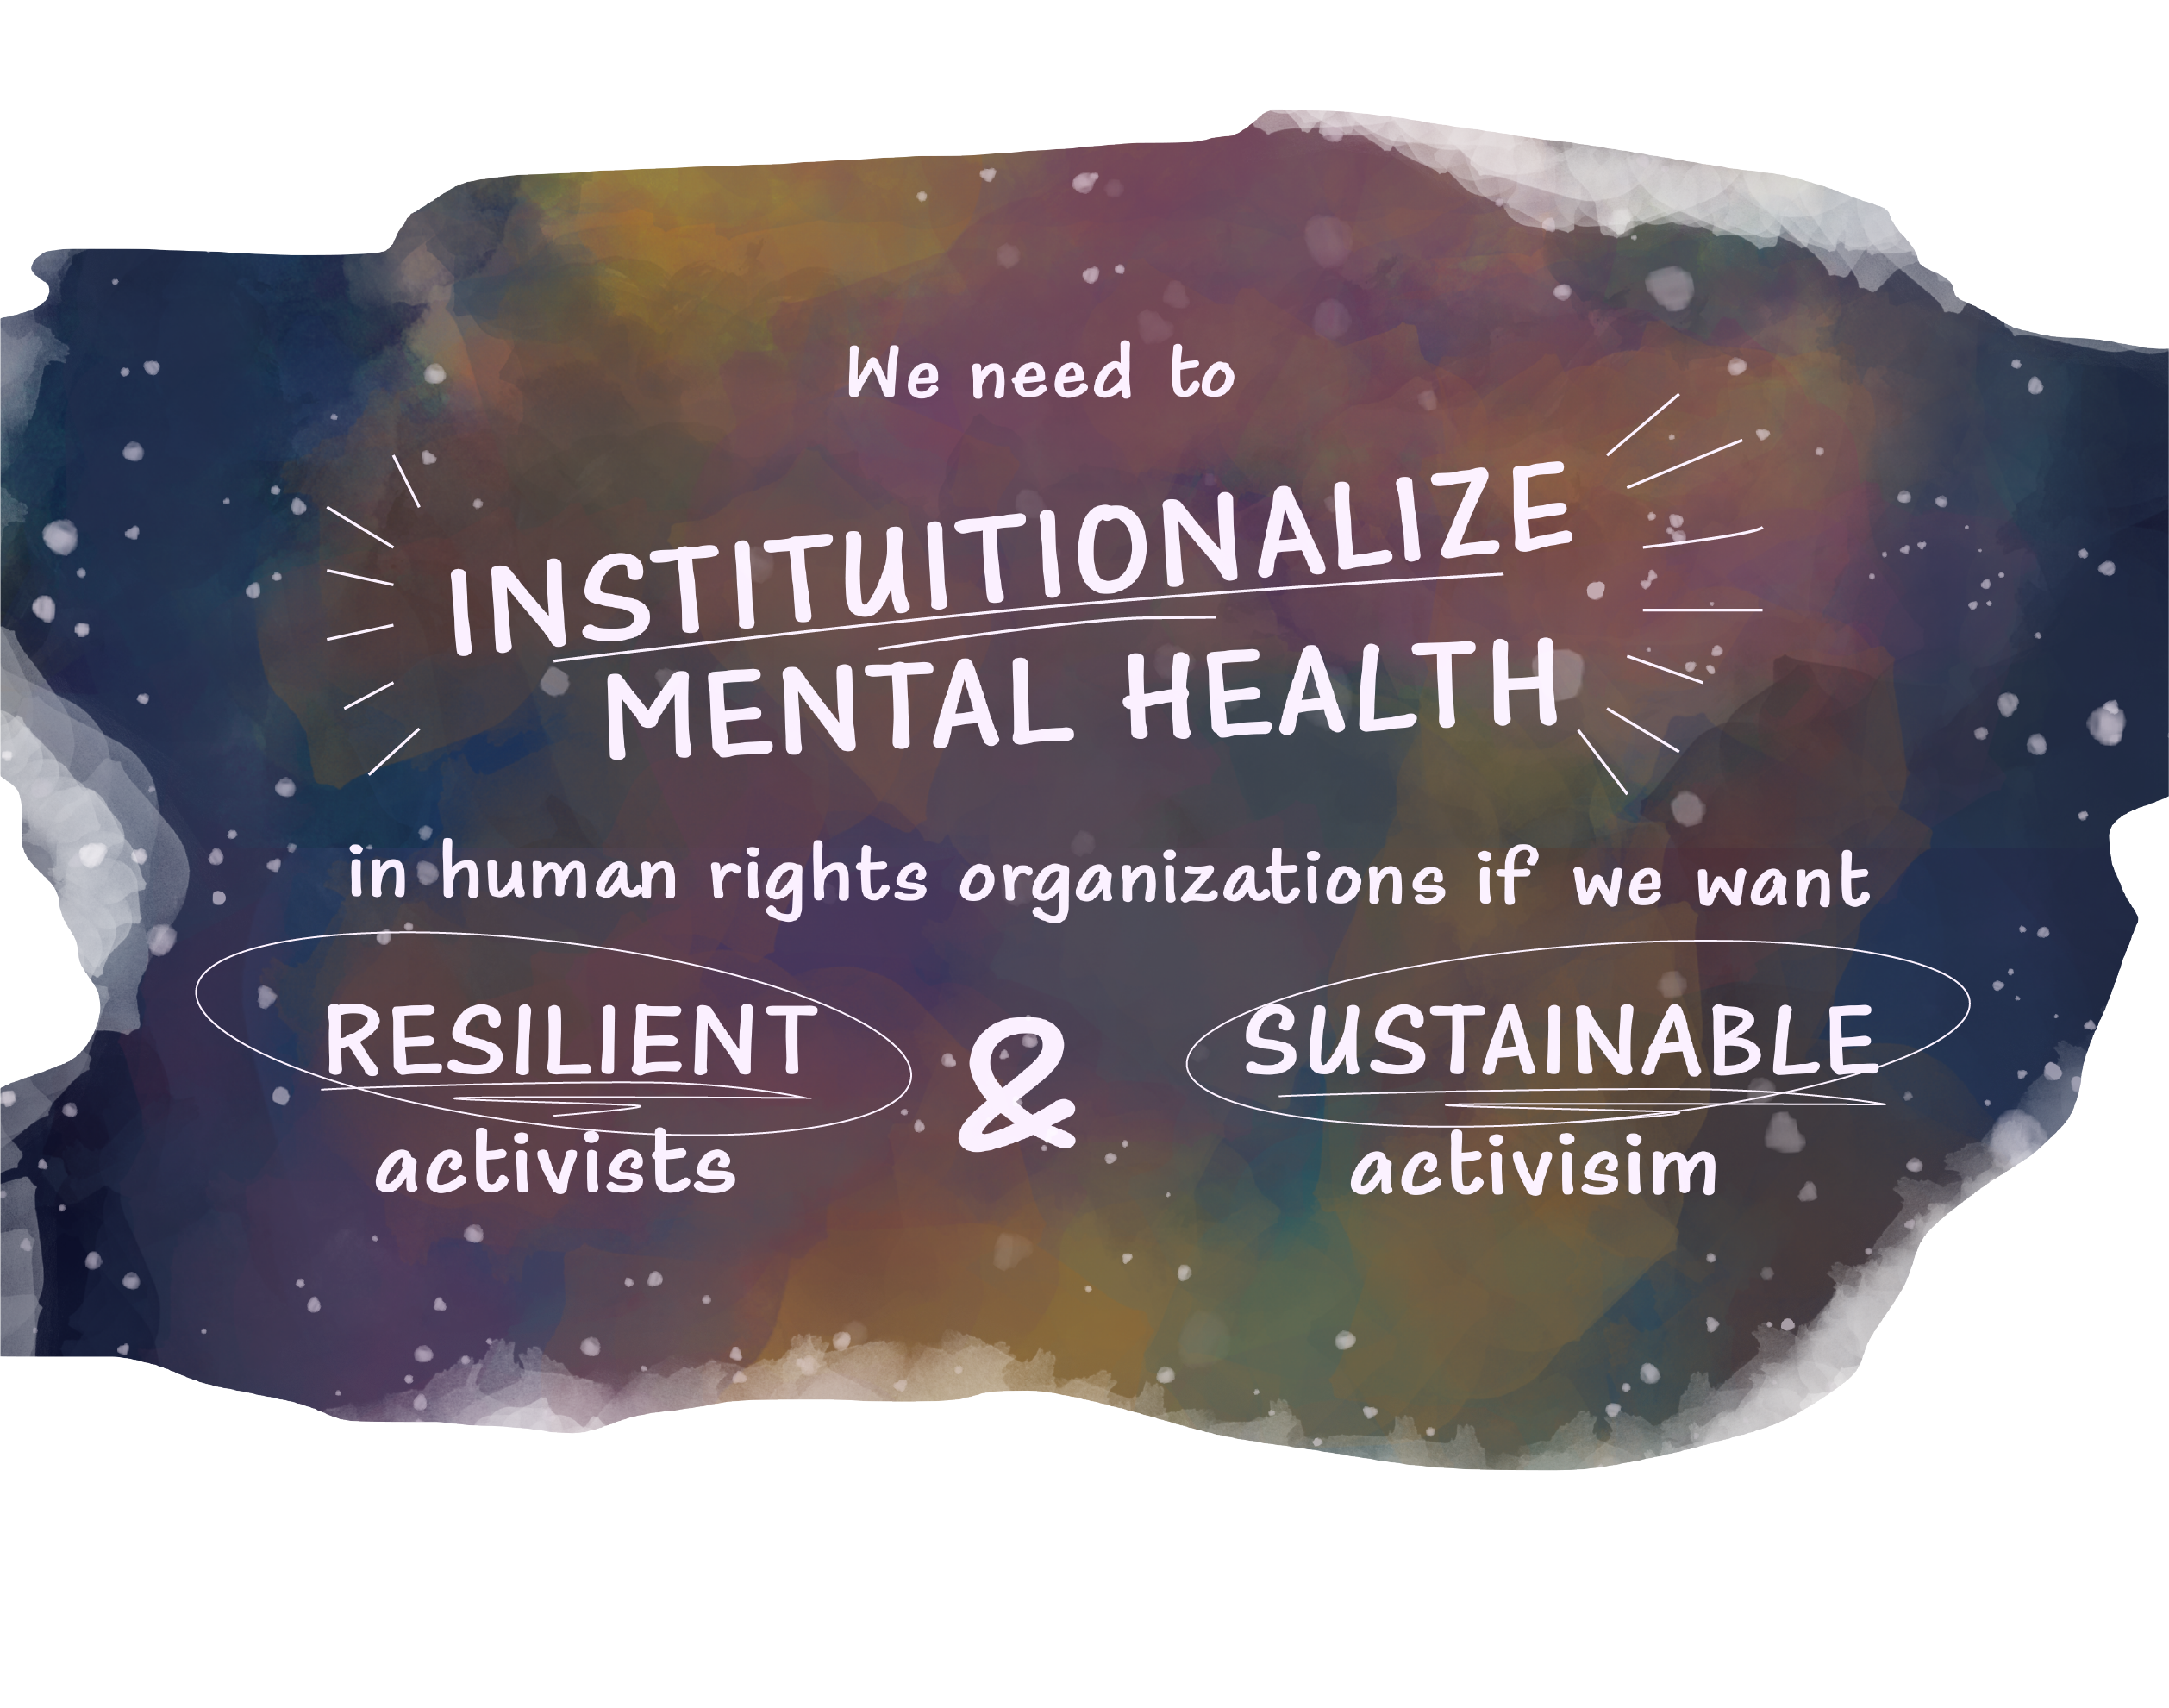 A watercolor wash that looks like a purplish–blue galaxy with clouds of green, yellow and pink. Written on top is “We need to institutionalize mental health in human rights organizations if we want resilient activists and sustainable activism”. The words “Institutionalize”, “Resilient”, and “Sustainable” are highlighted with scribbles of lines and circles. 